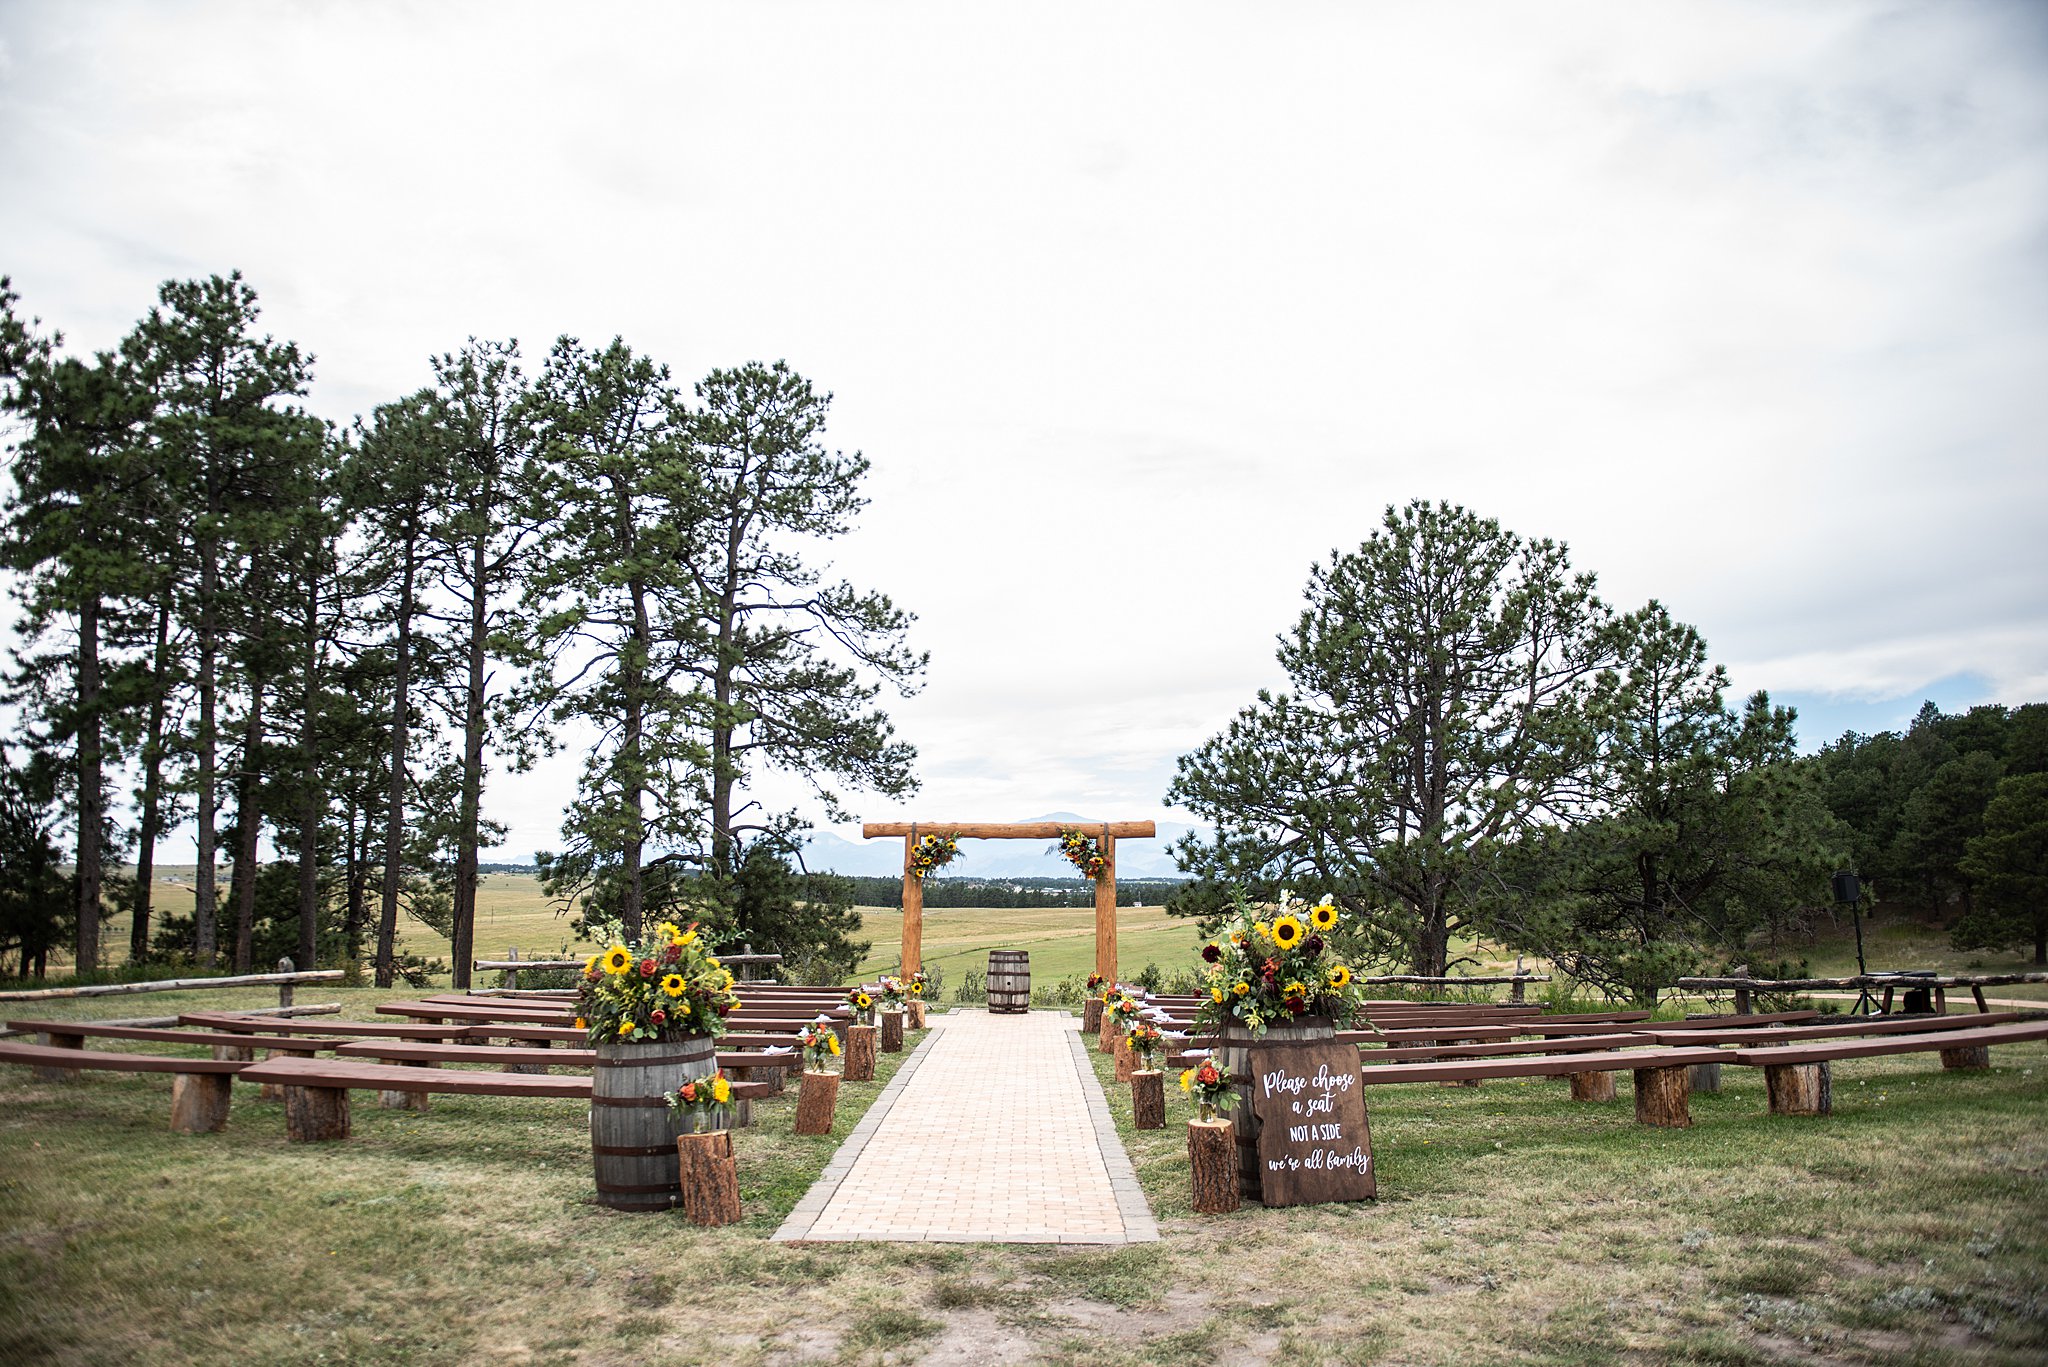 Details of a wedding ceremony set up outside in a pasture with log arbor and benches